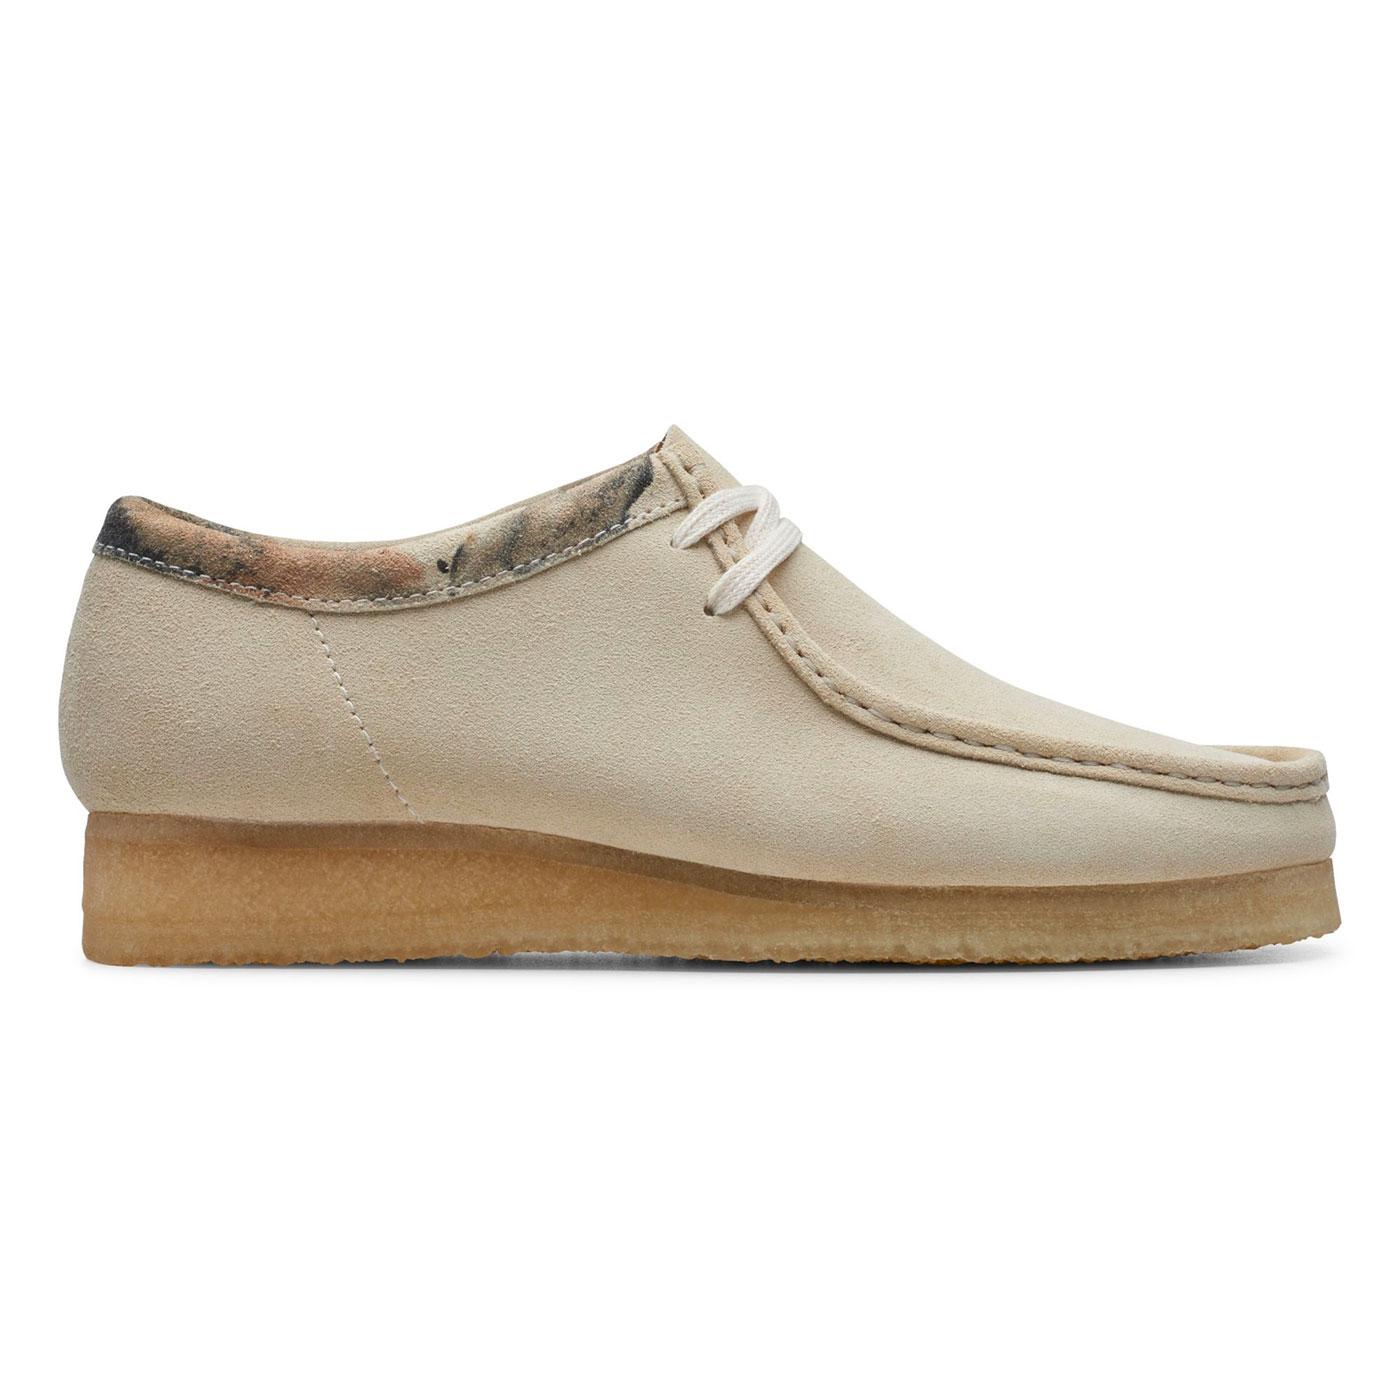 Wallabee White Suede